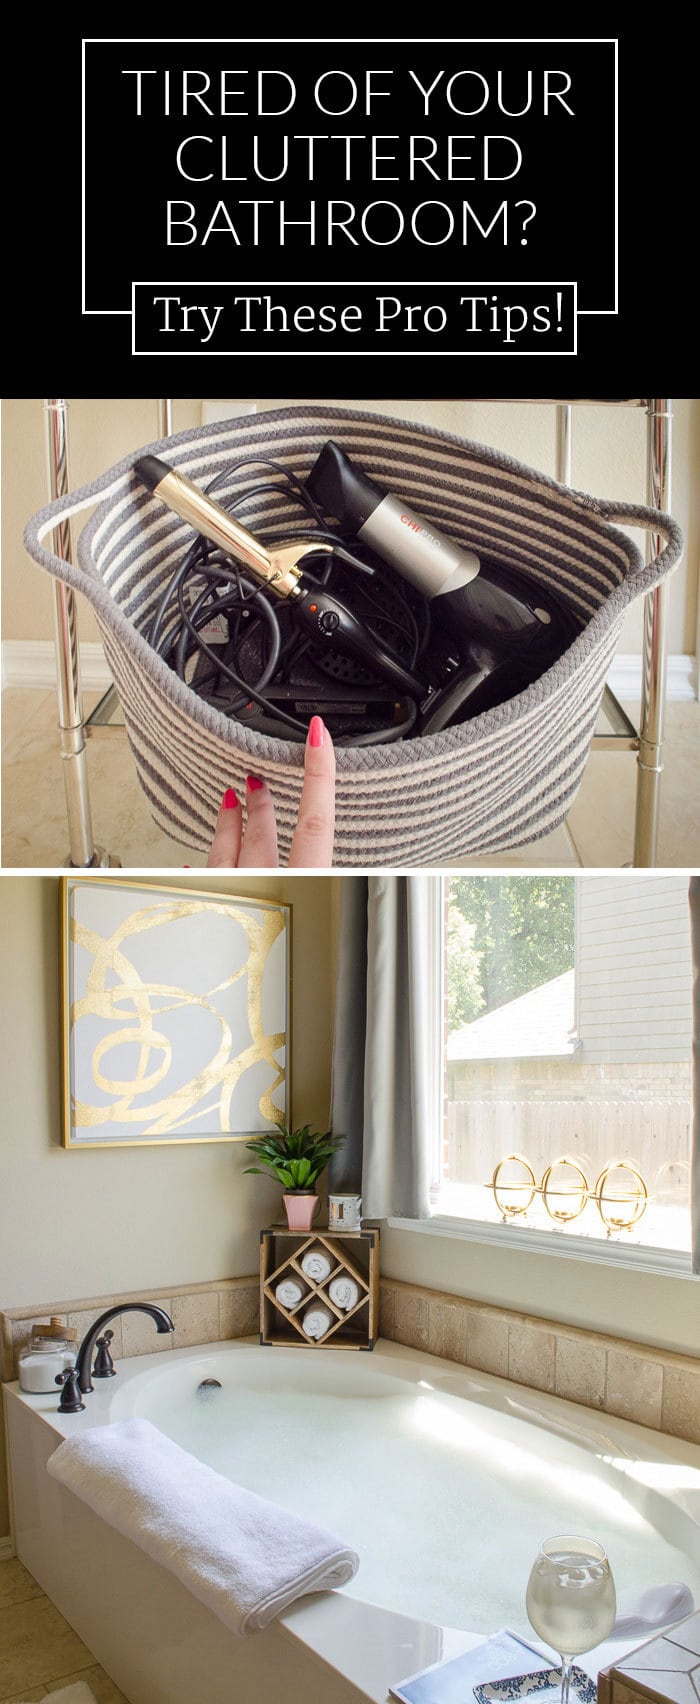 I NEED THIS! Clutter in the bathroom makes me crazy. / Organize and decorate your master bathroom at the same time with these clever tips for organizing your bathroom in style.